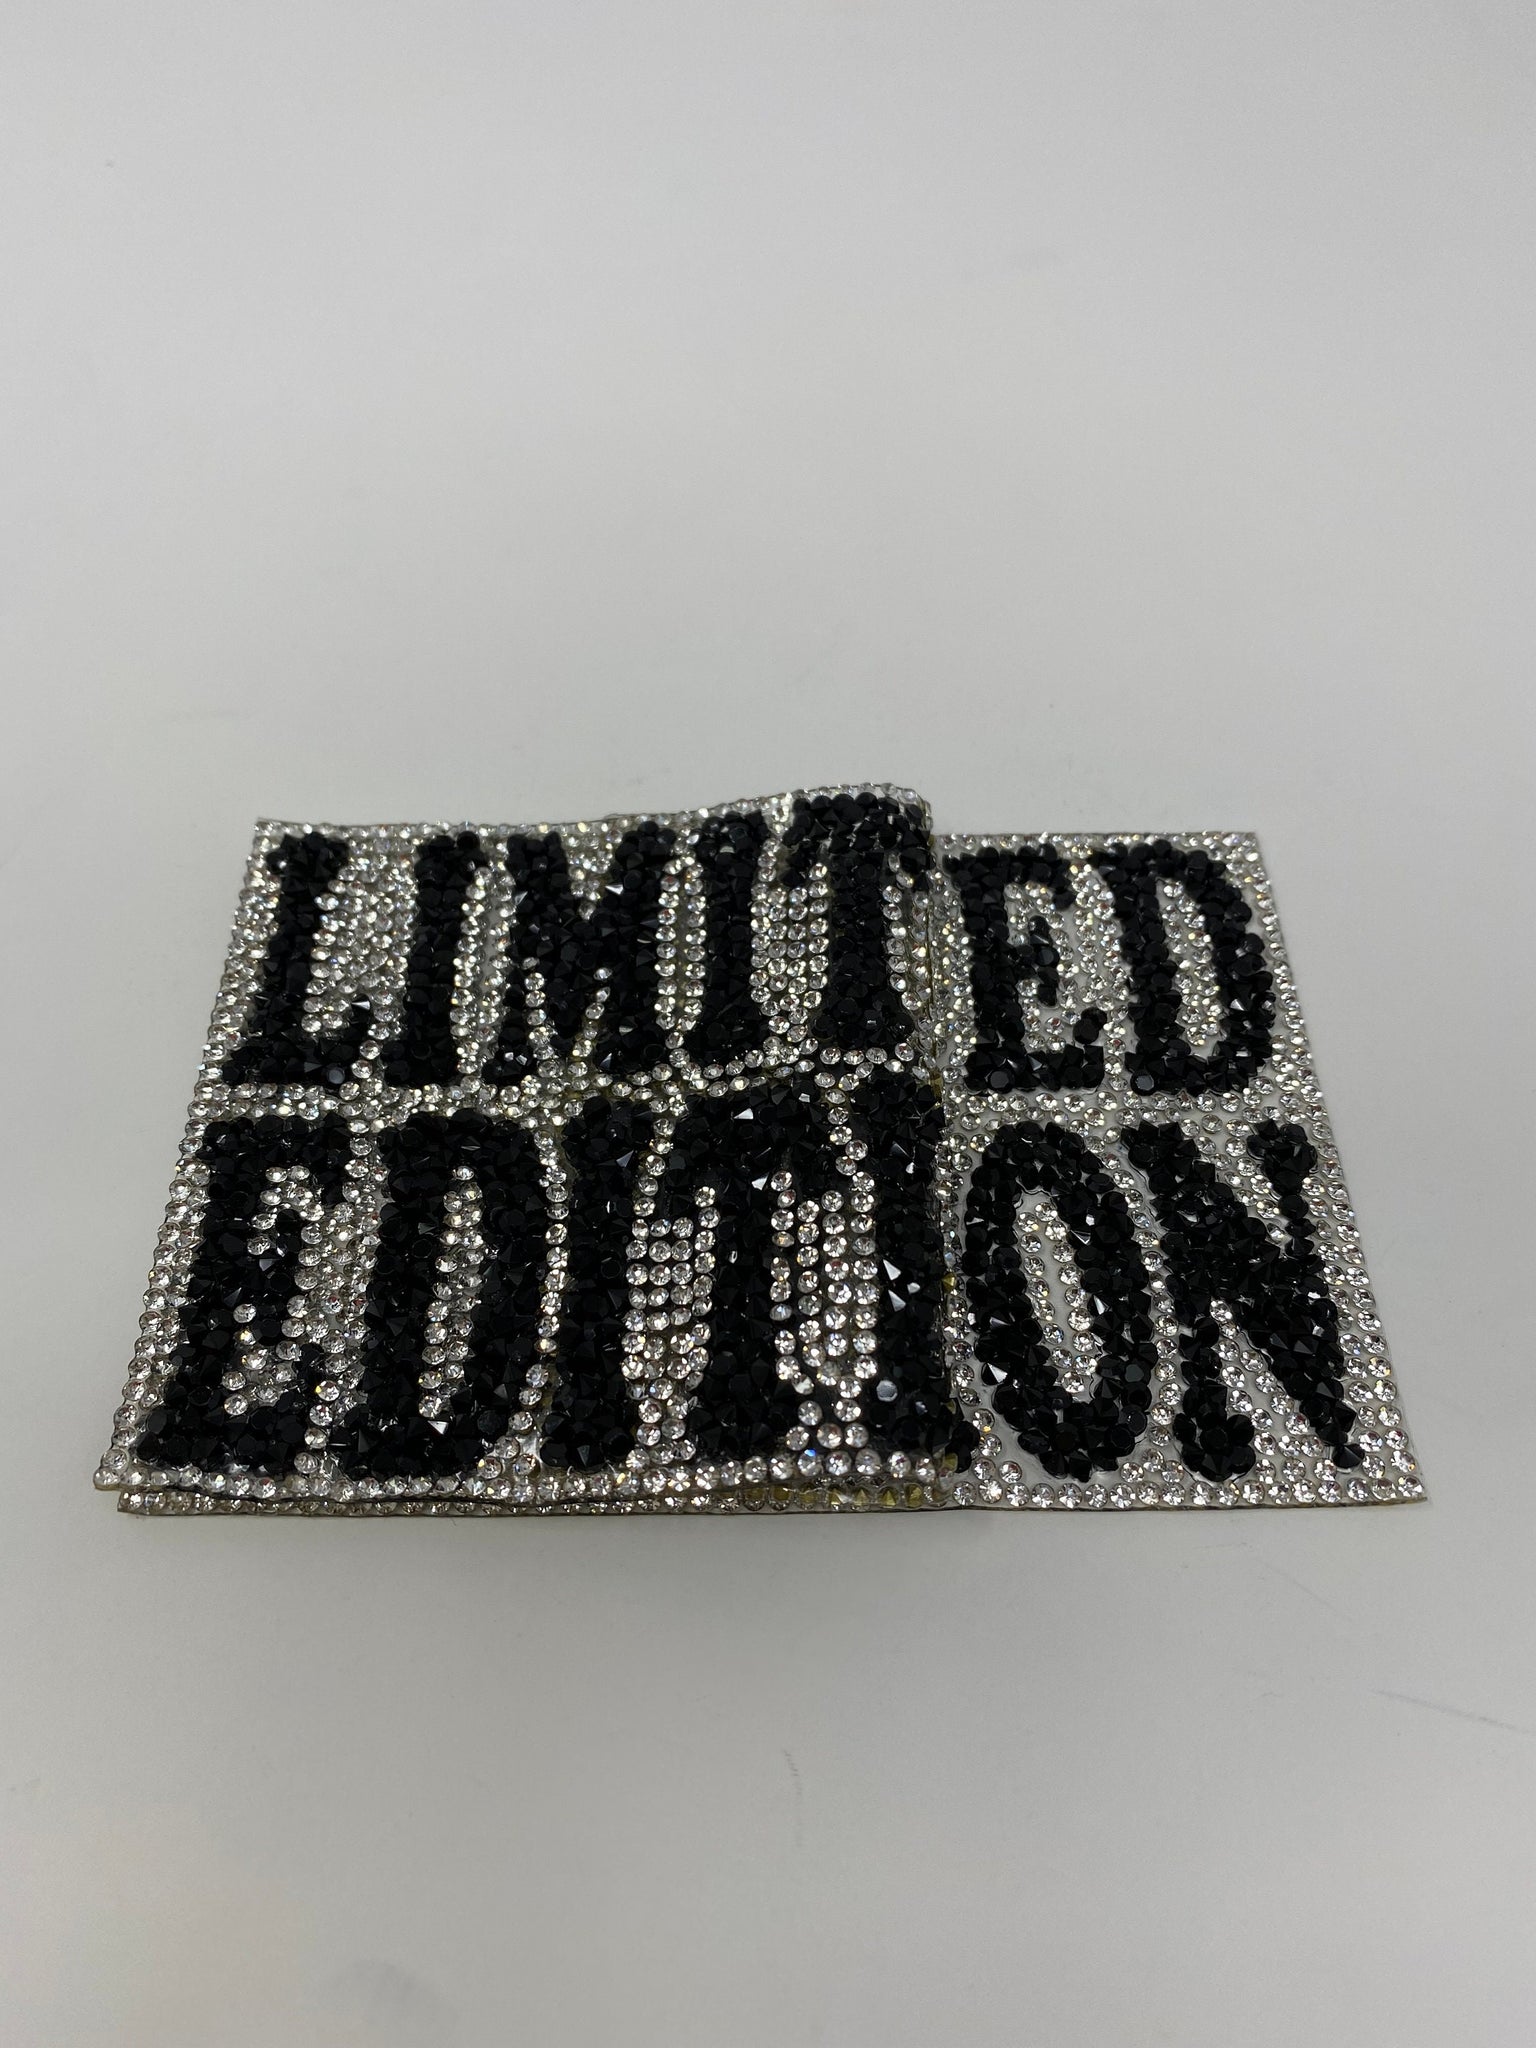 NEW, Blinged Out "Limited Edition" Rhinestone Patch with Adhesive, Rhinestone Applique, Size 5"x2.5", Czech Rhinestones, DIY Applique